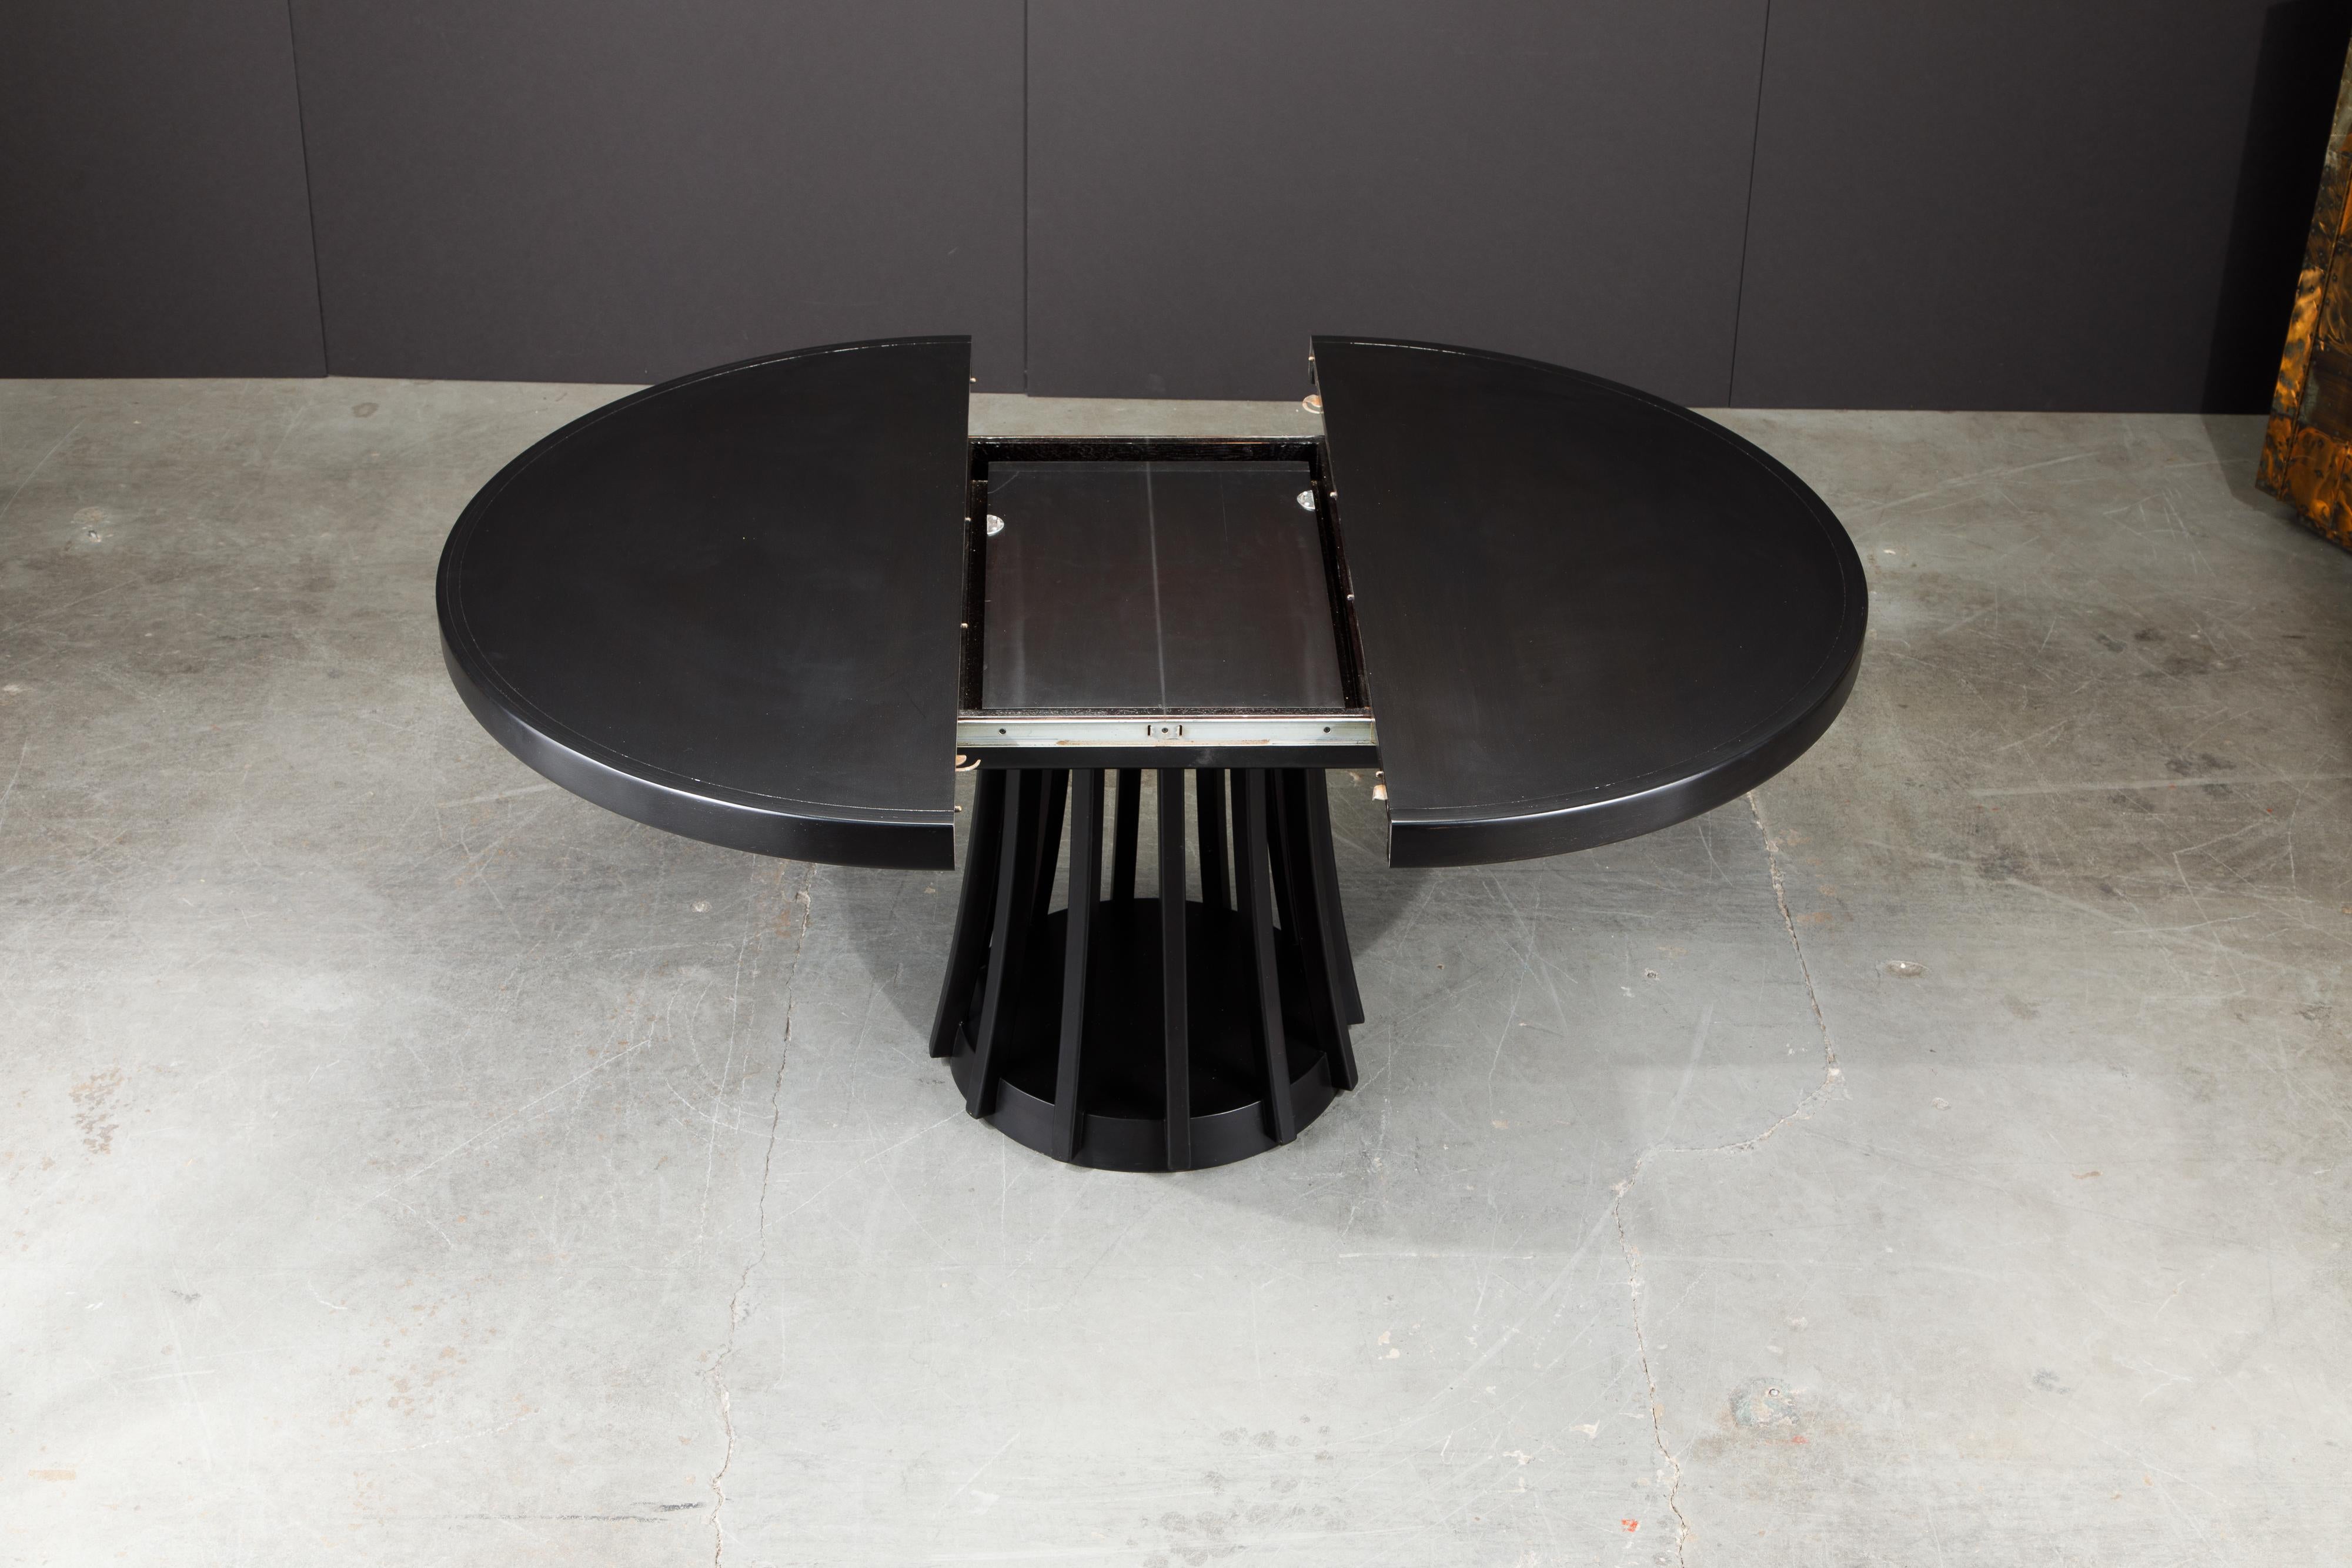 Wood 'Programma S11' Extending Dining Table by Angelo Mangiarotti, Italy, 1972